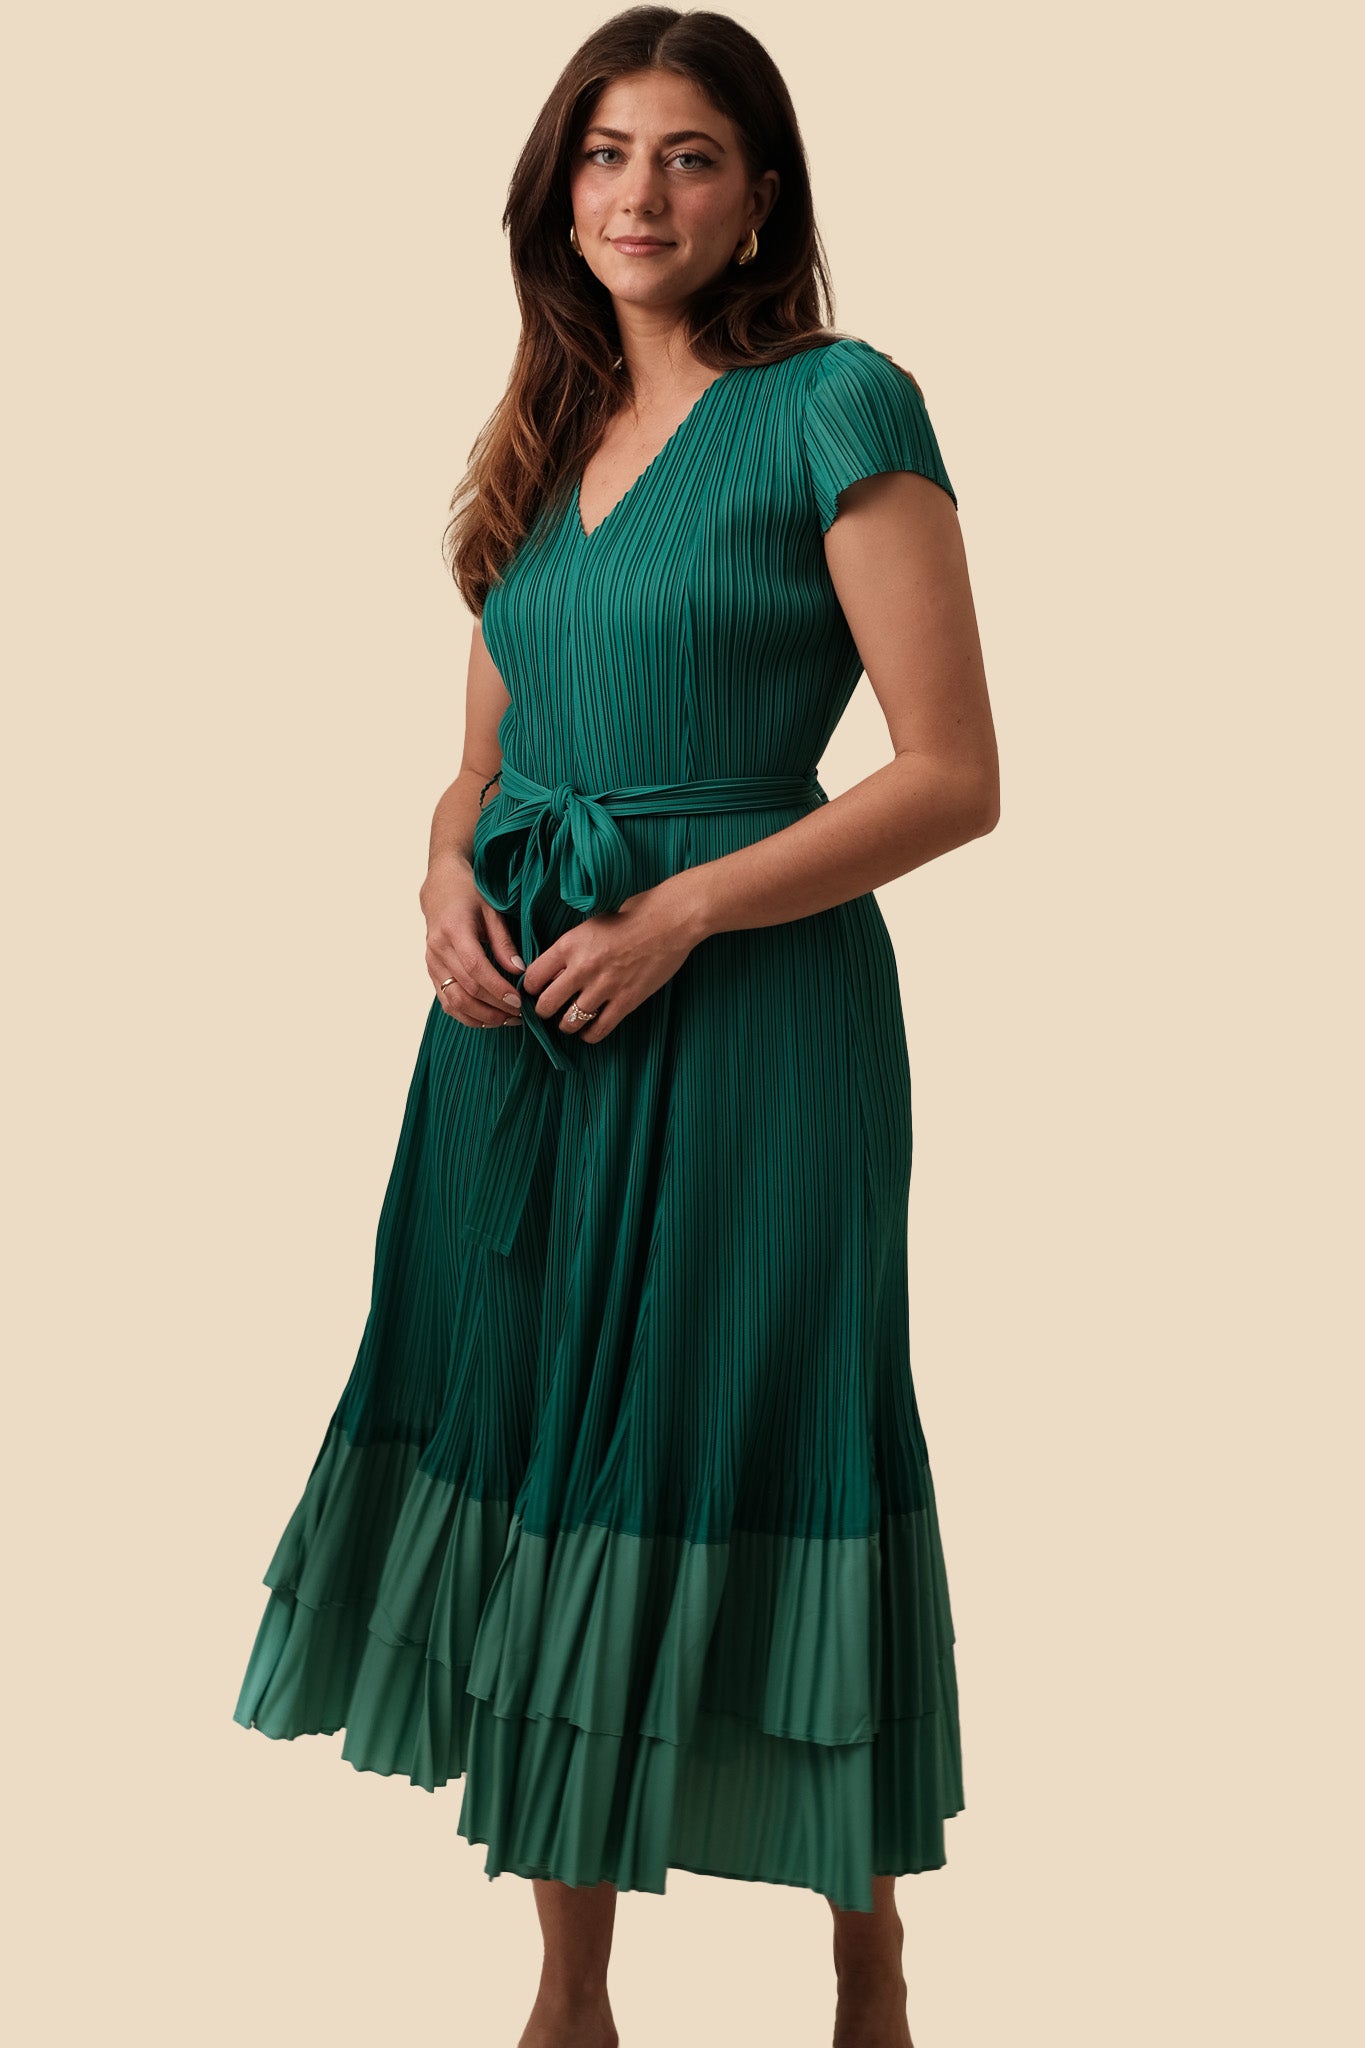 Current Air Helen Pleated Color Block Midi Dress (Teal)